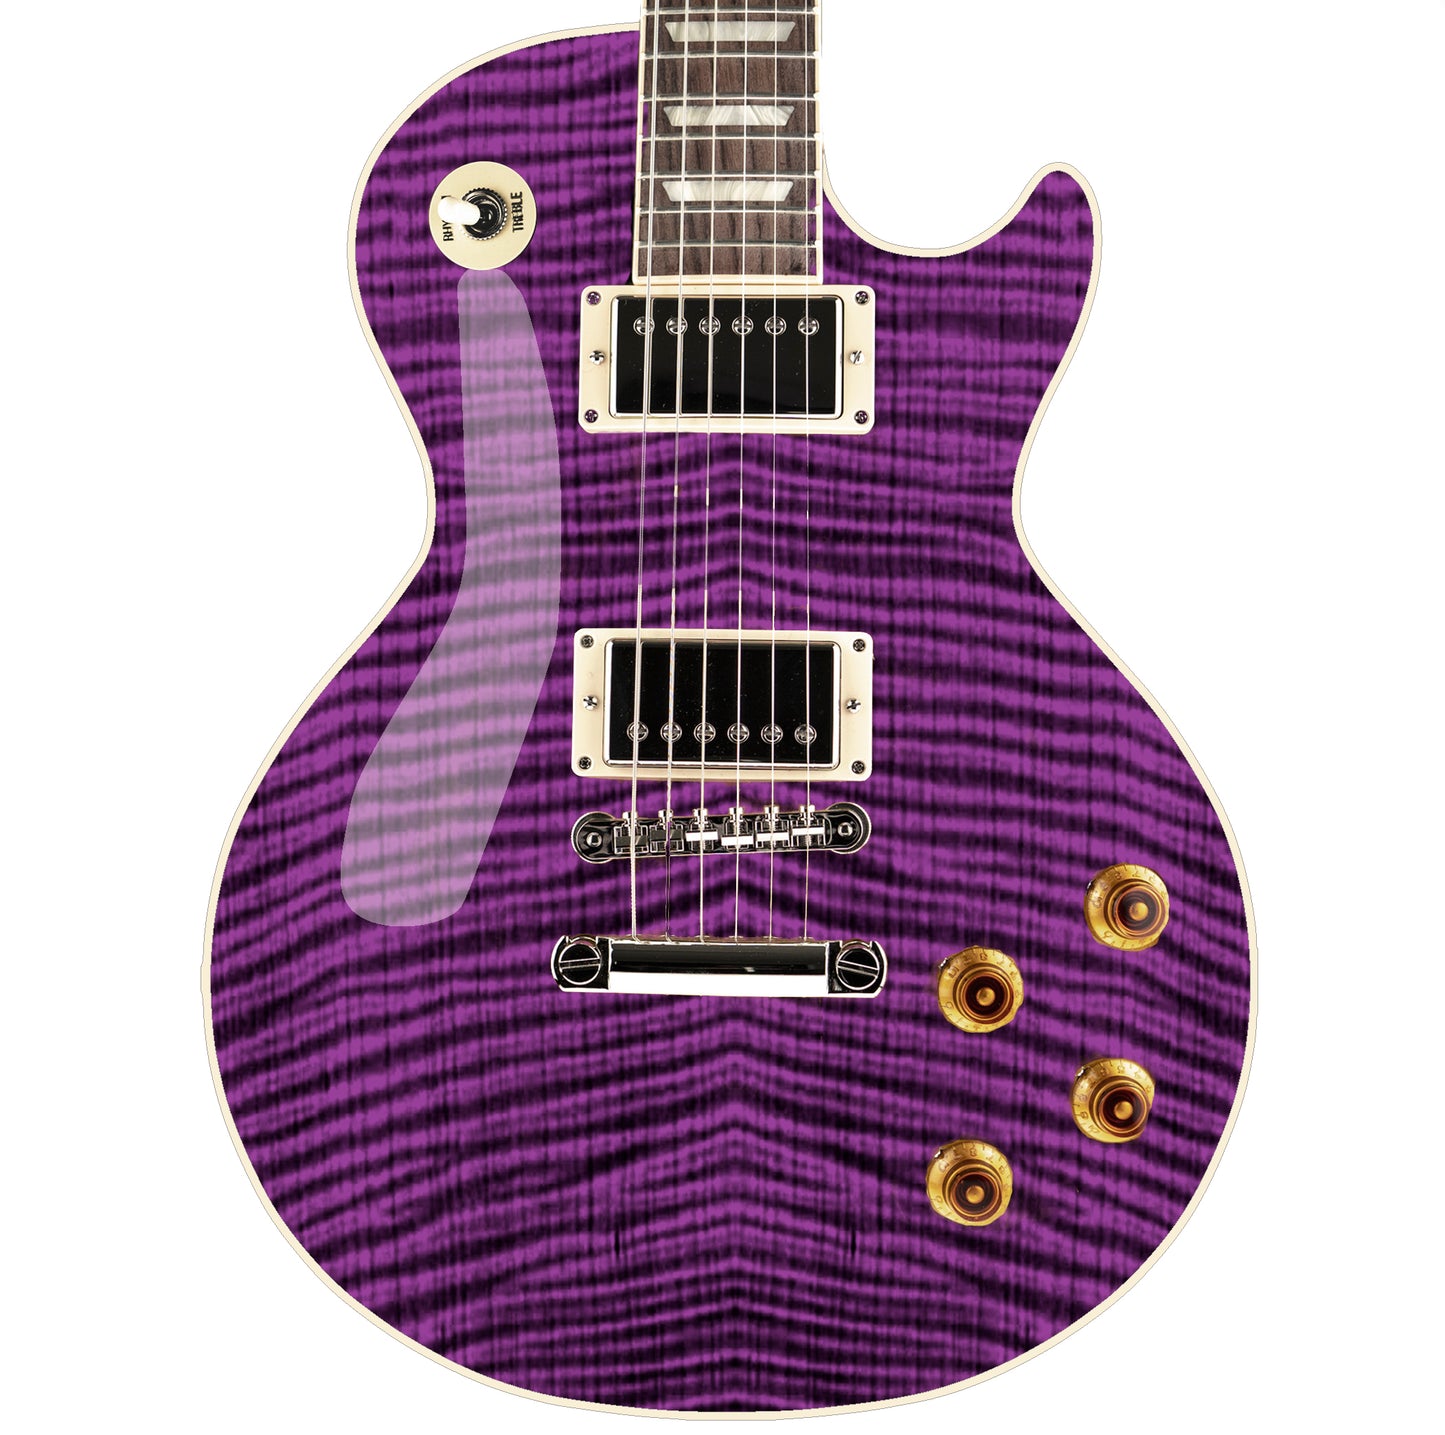 Guitar Skin Wrap Laminated Vinyl Decal Sticker The Purple Flamed Maple GS51